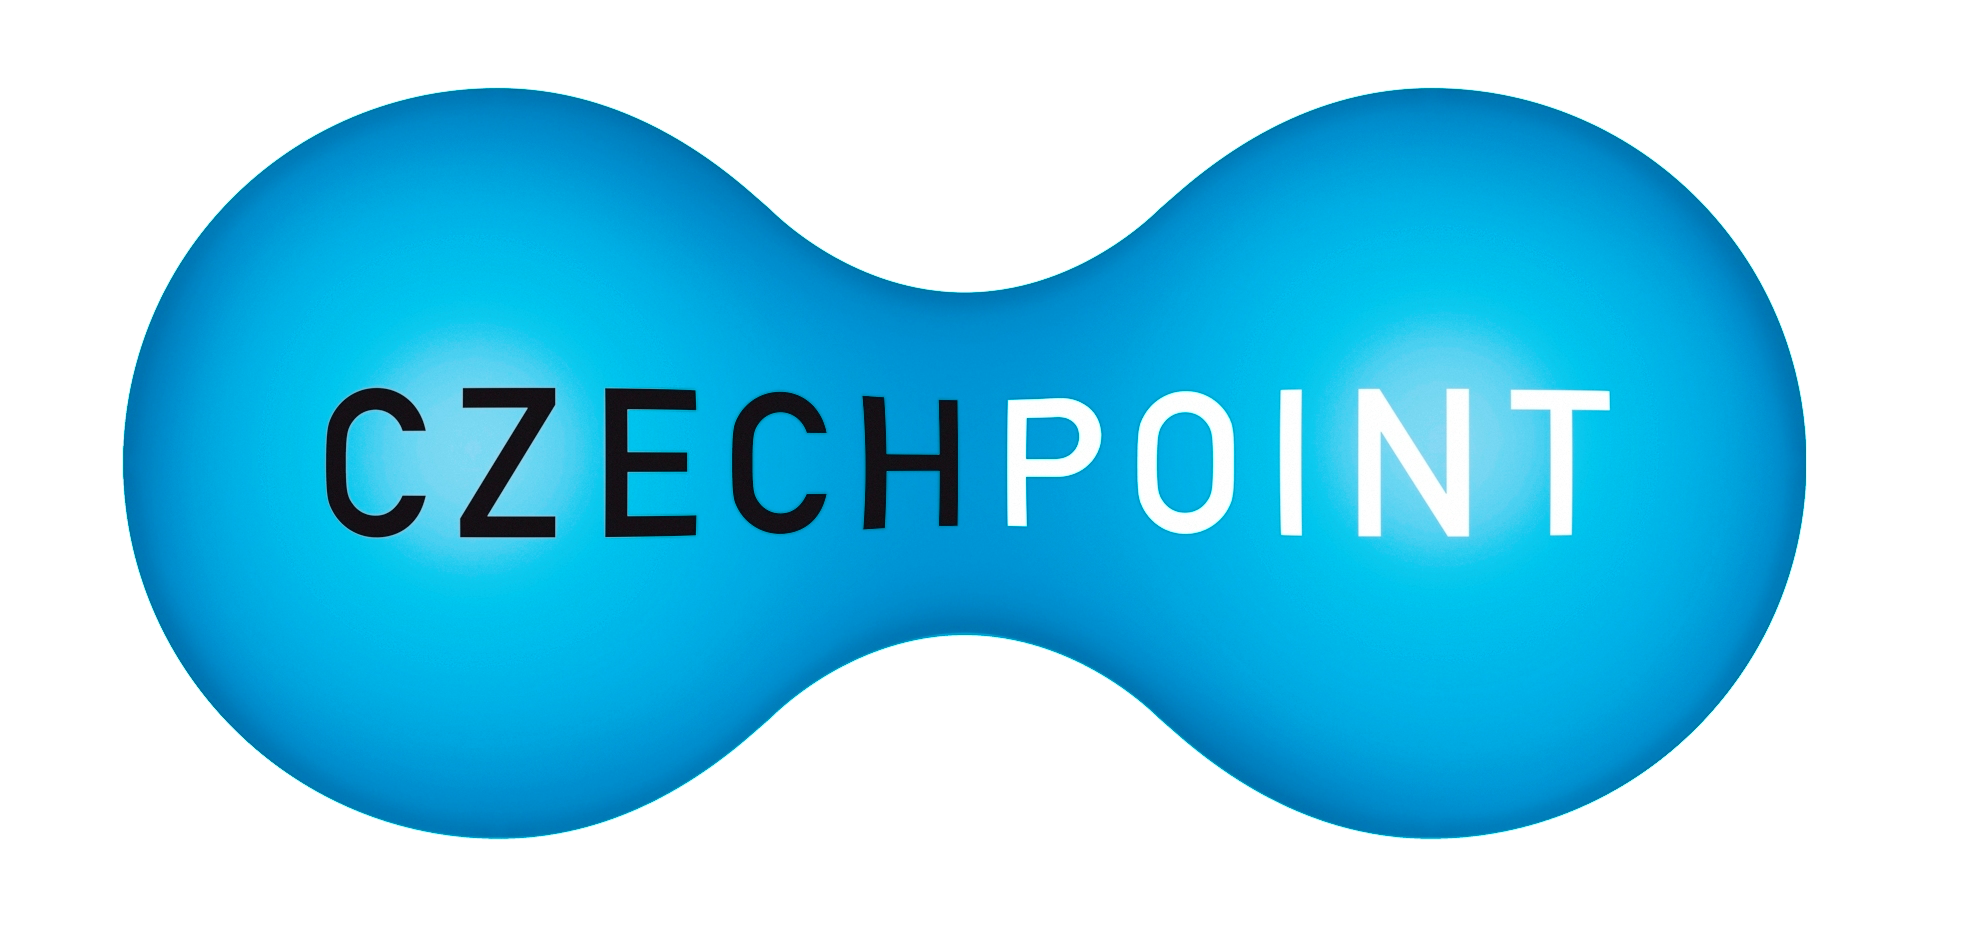 logo-czechpoint-trans.png (1.10 MB)